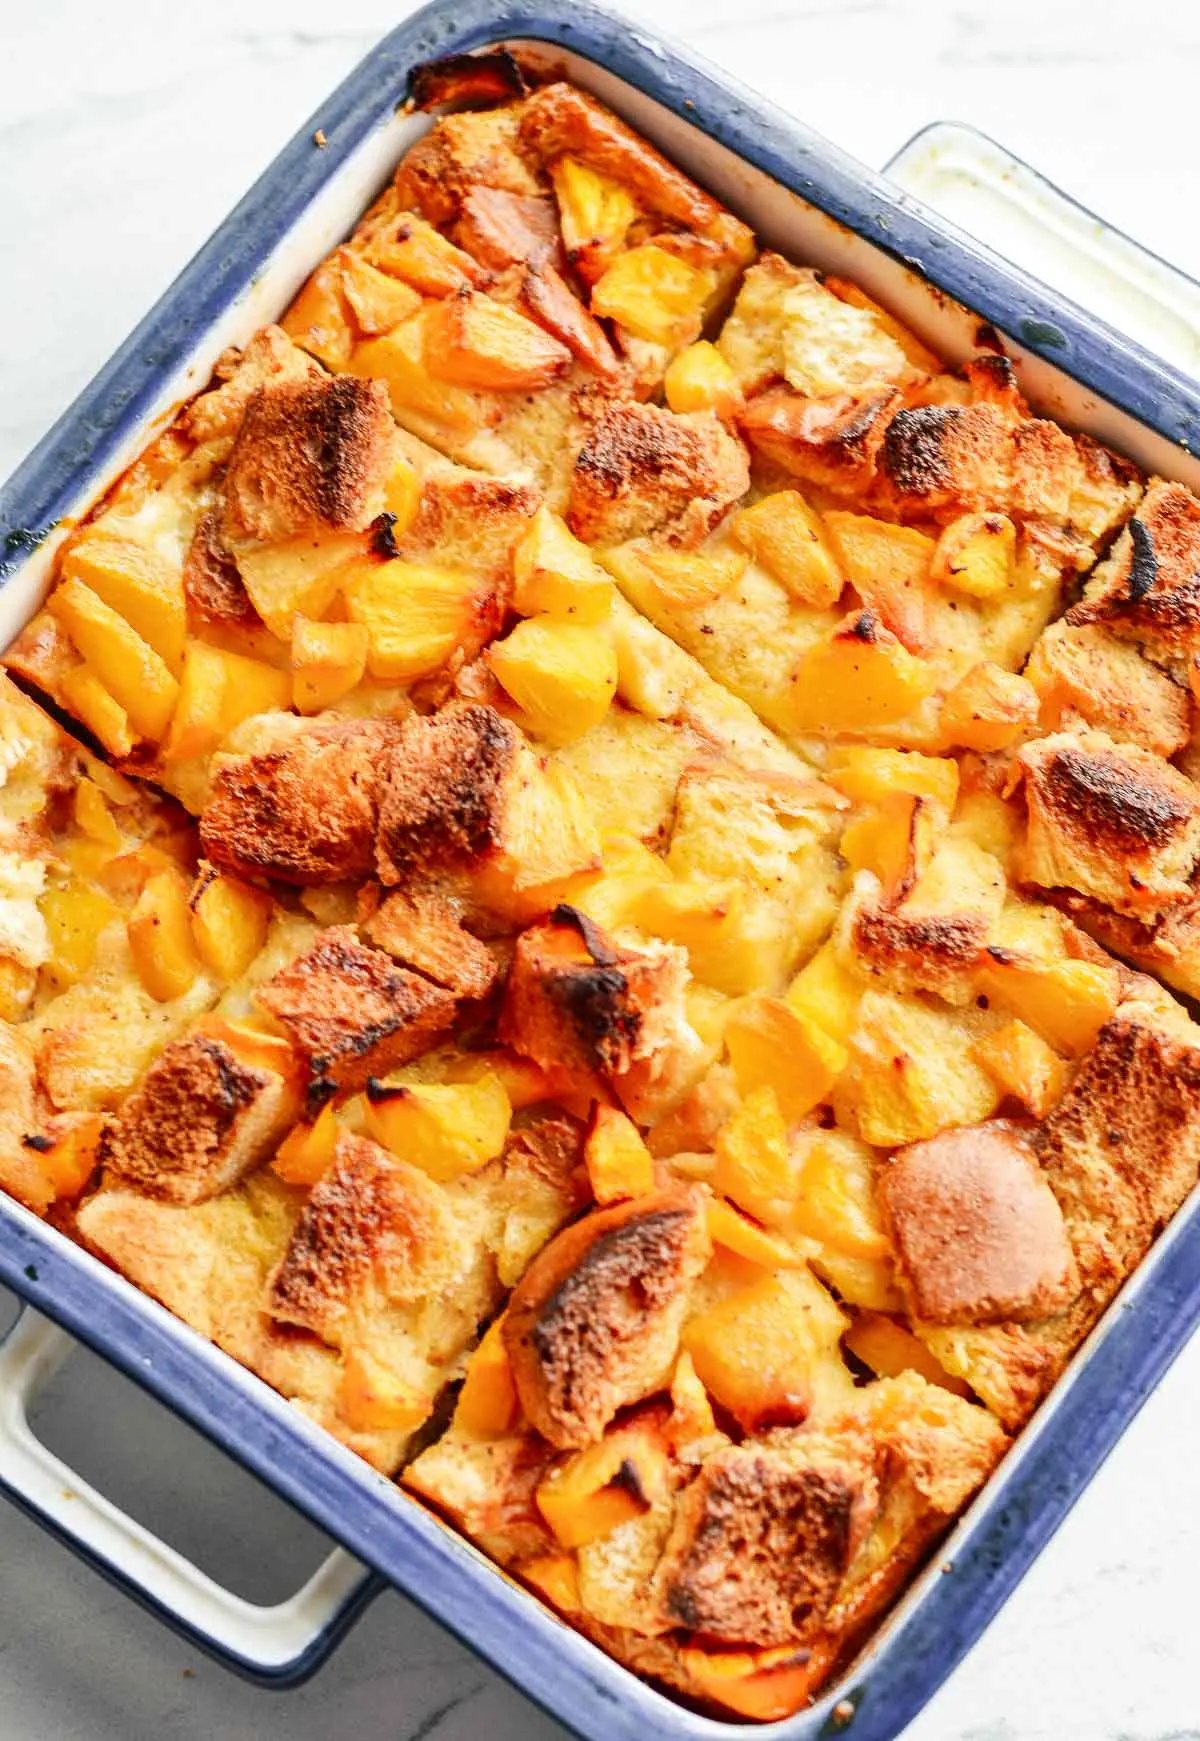 Top of baked Peach French toast